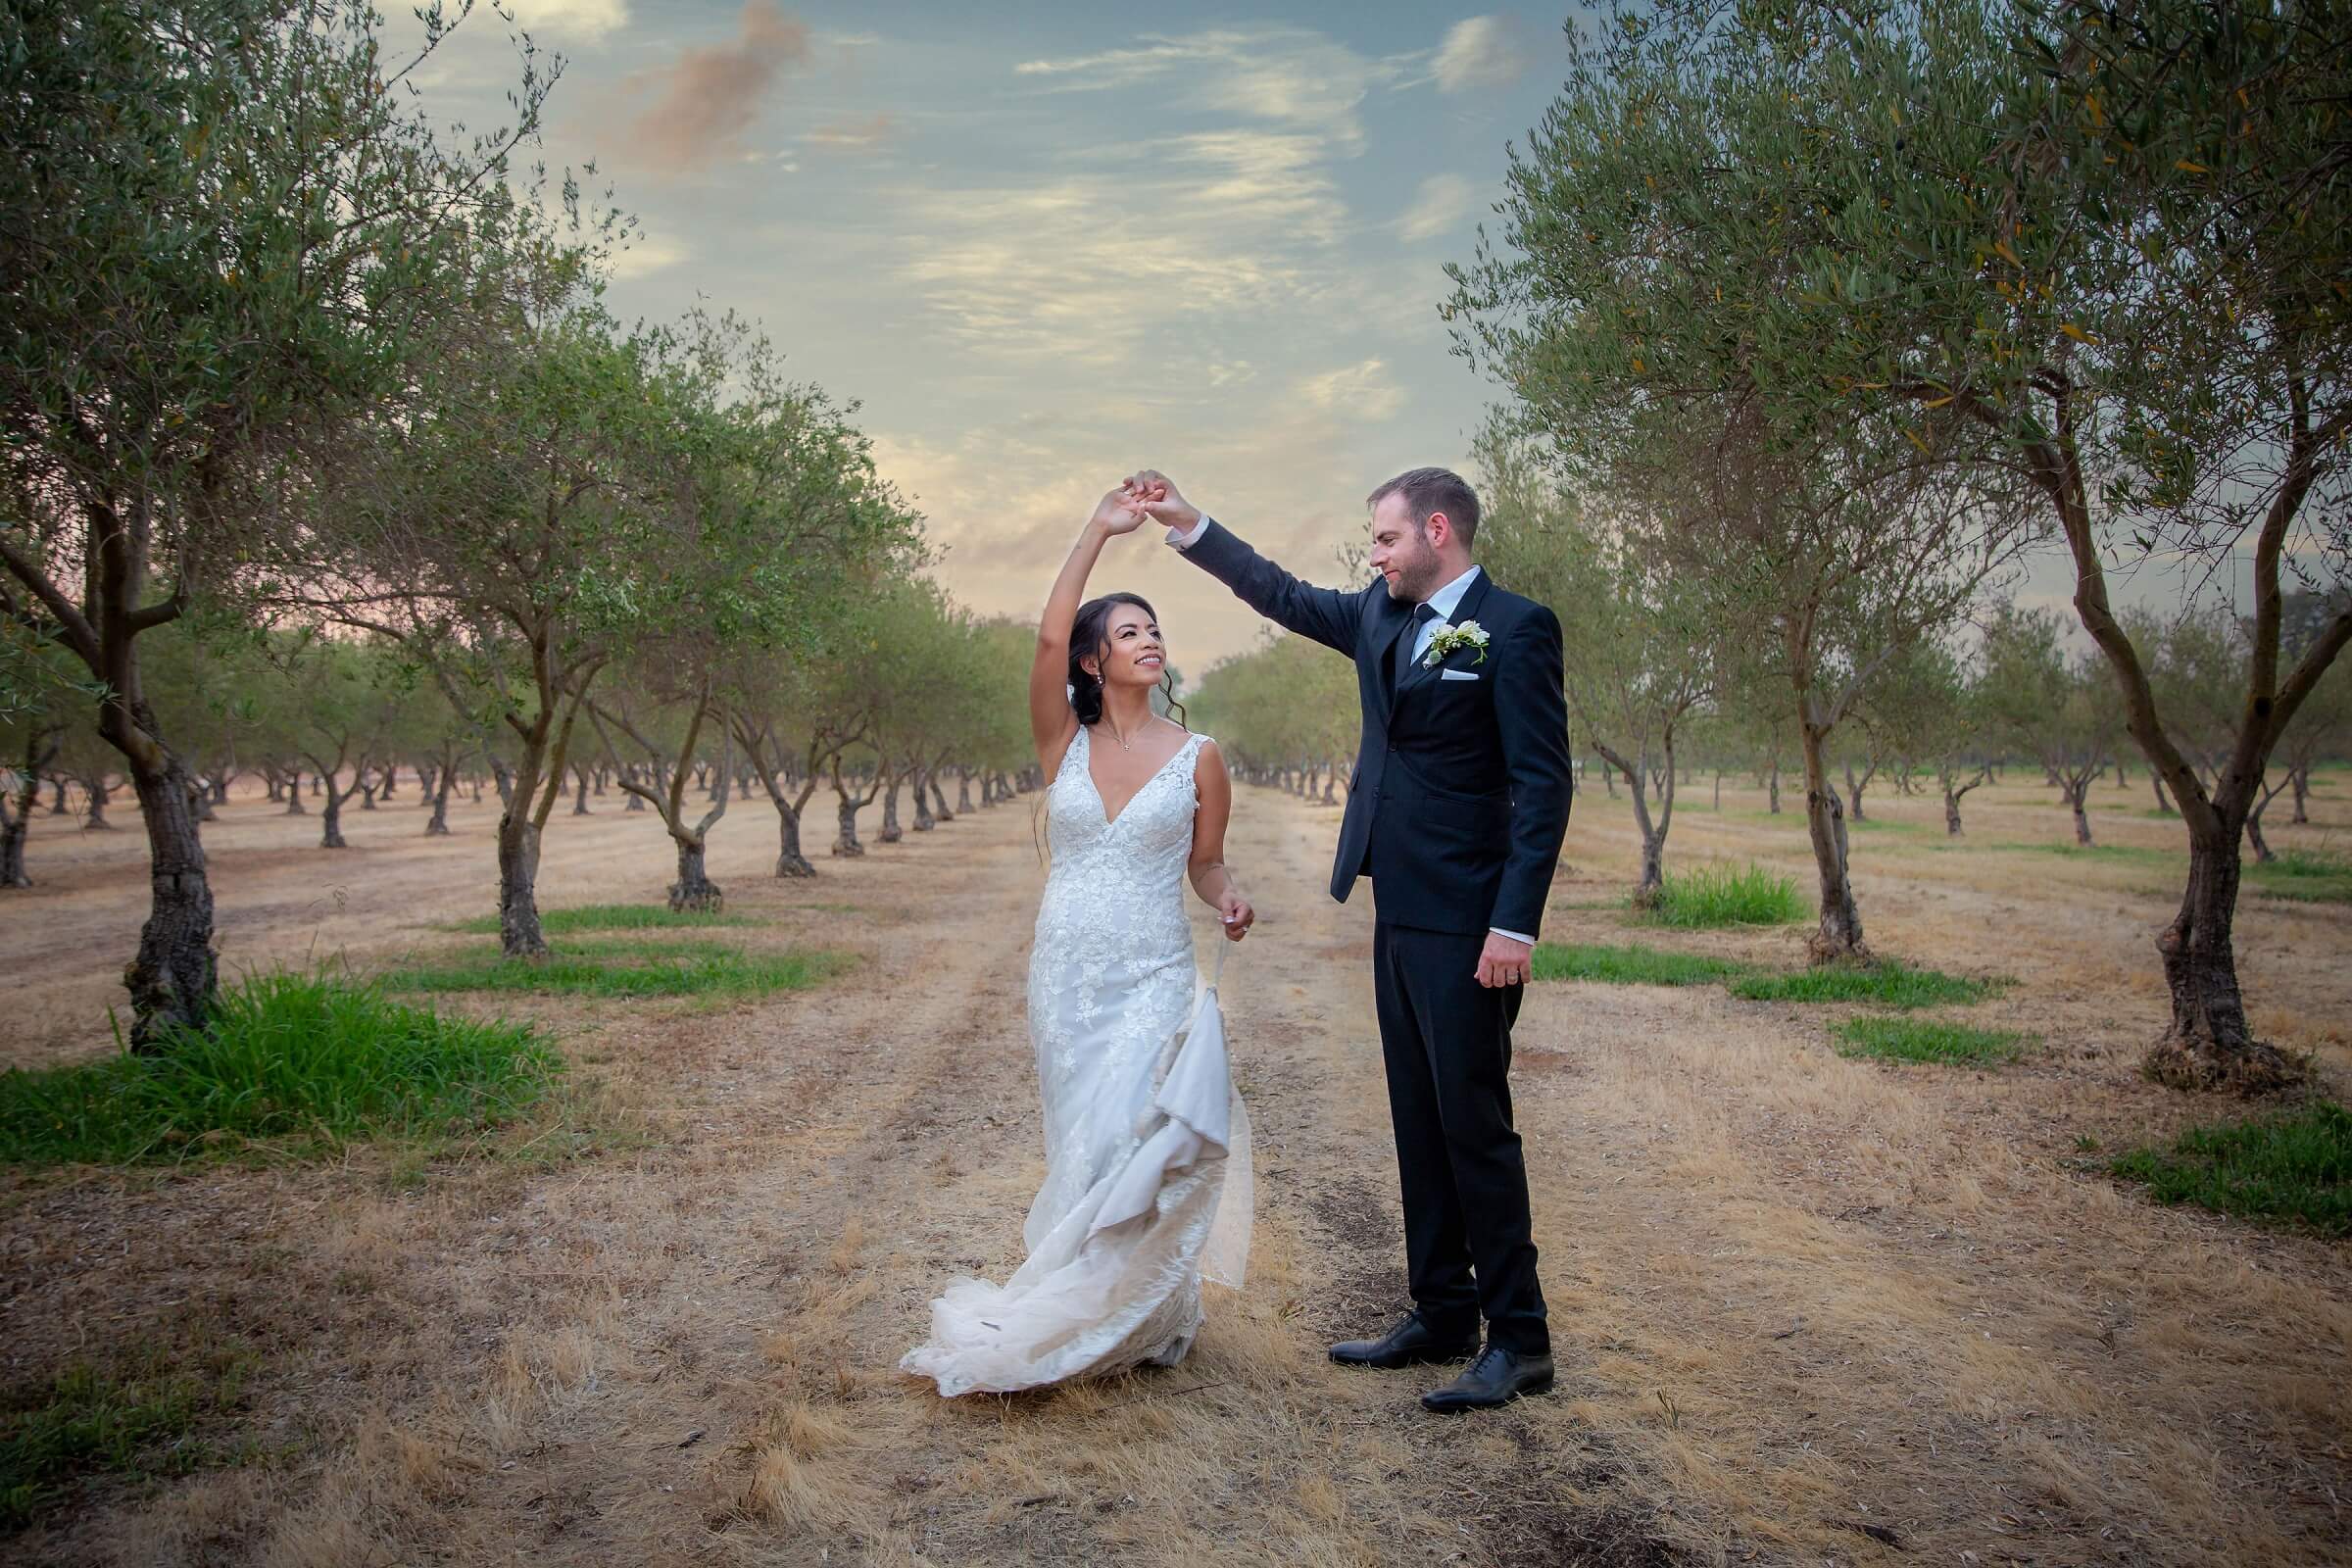 professional photography videography service portrait of groom twirling bride in vineyard